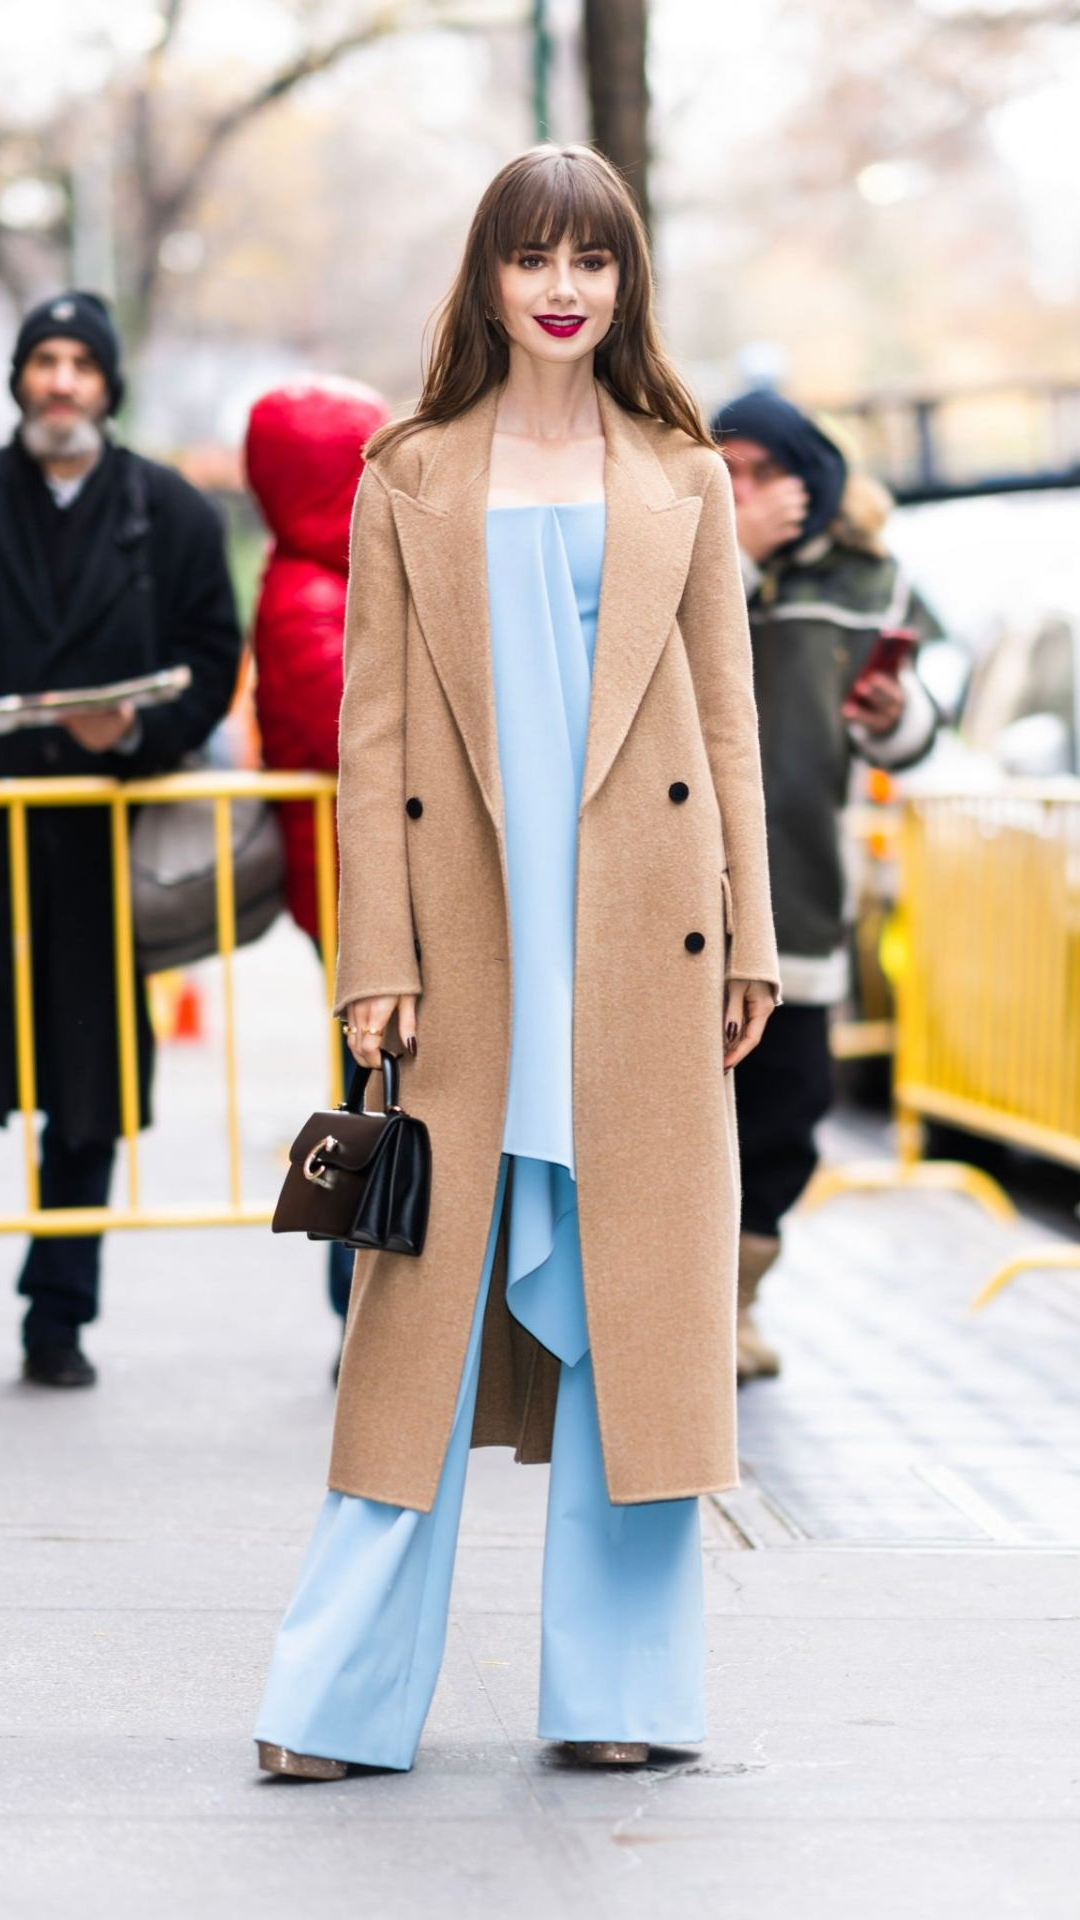 Master the Art of Winter Dressing Like Lily Collins
